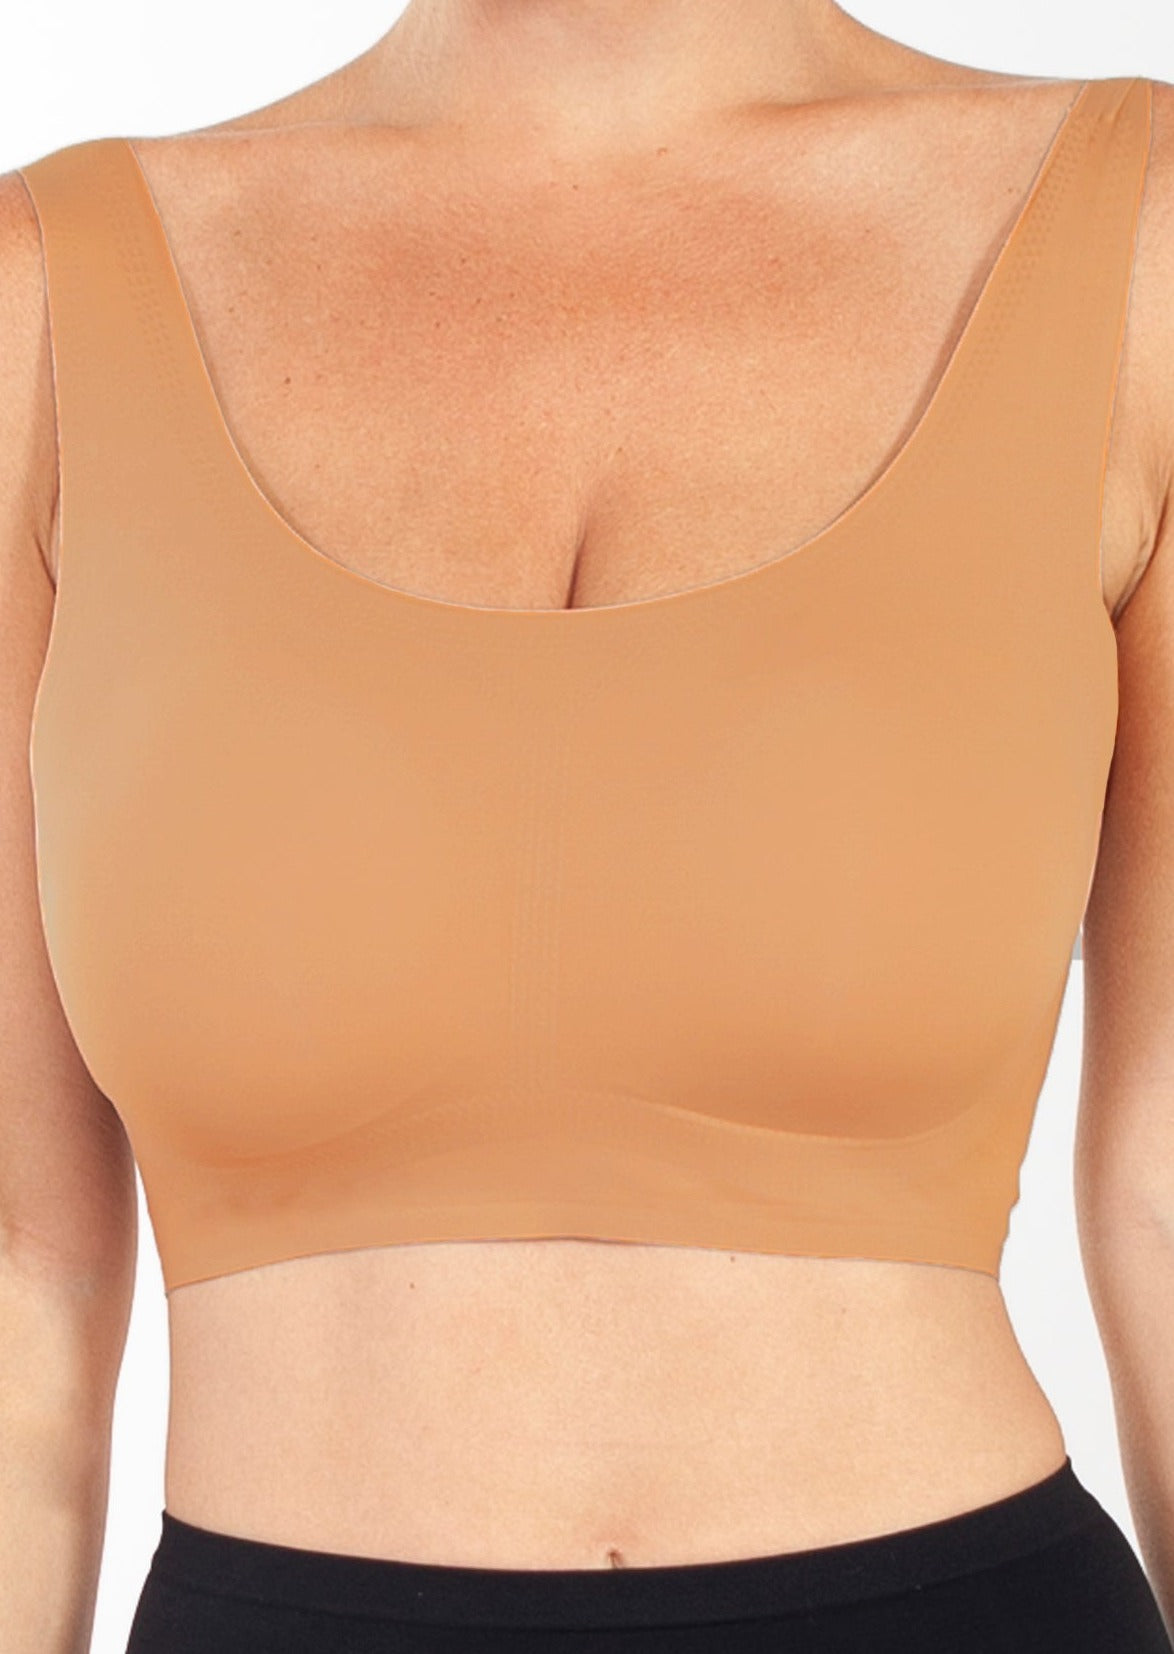 Rhonda Shear 2-pack Invisible Body Bra with Lift – goSASS